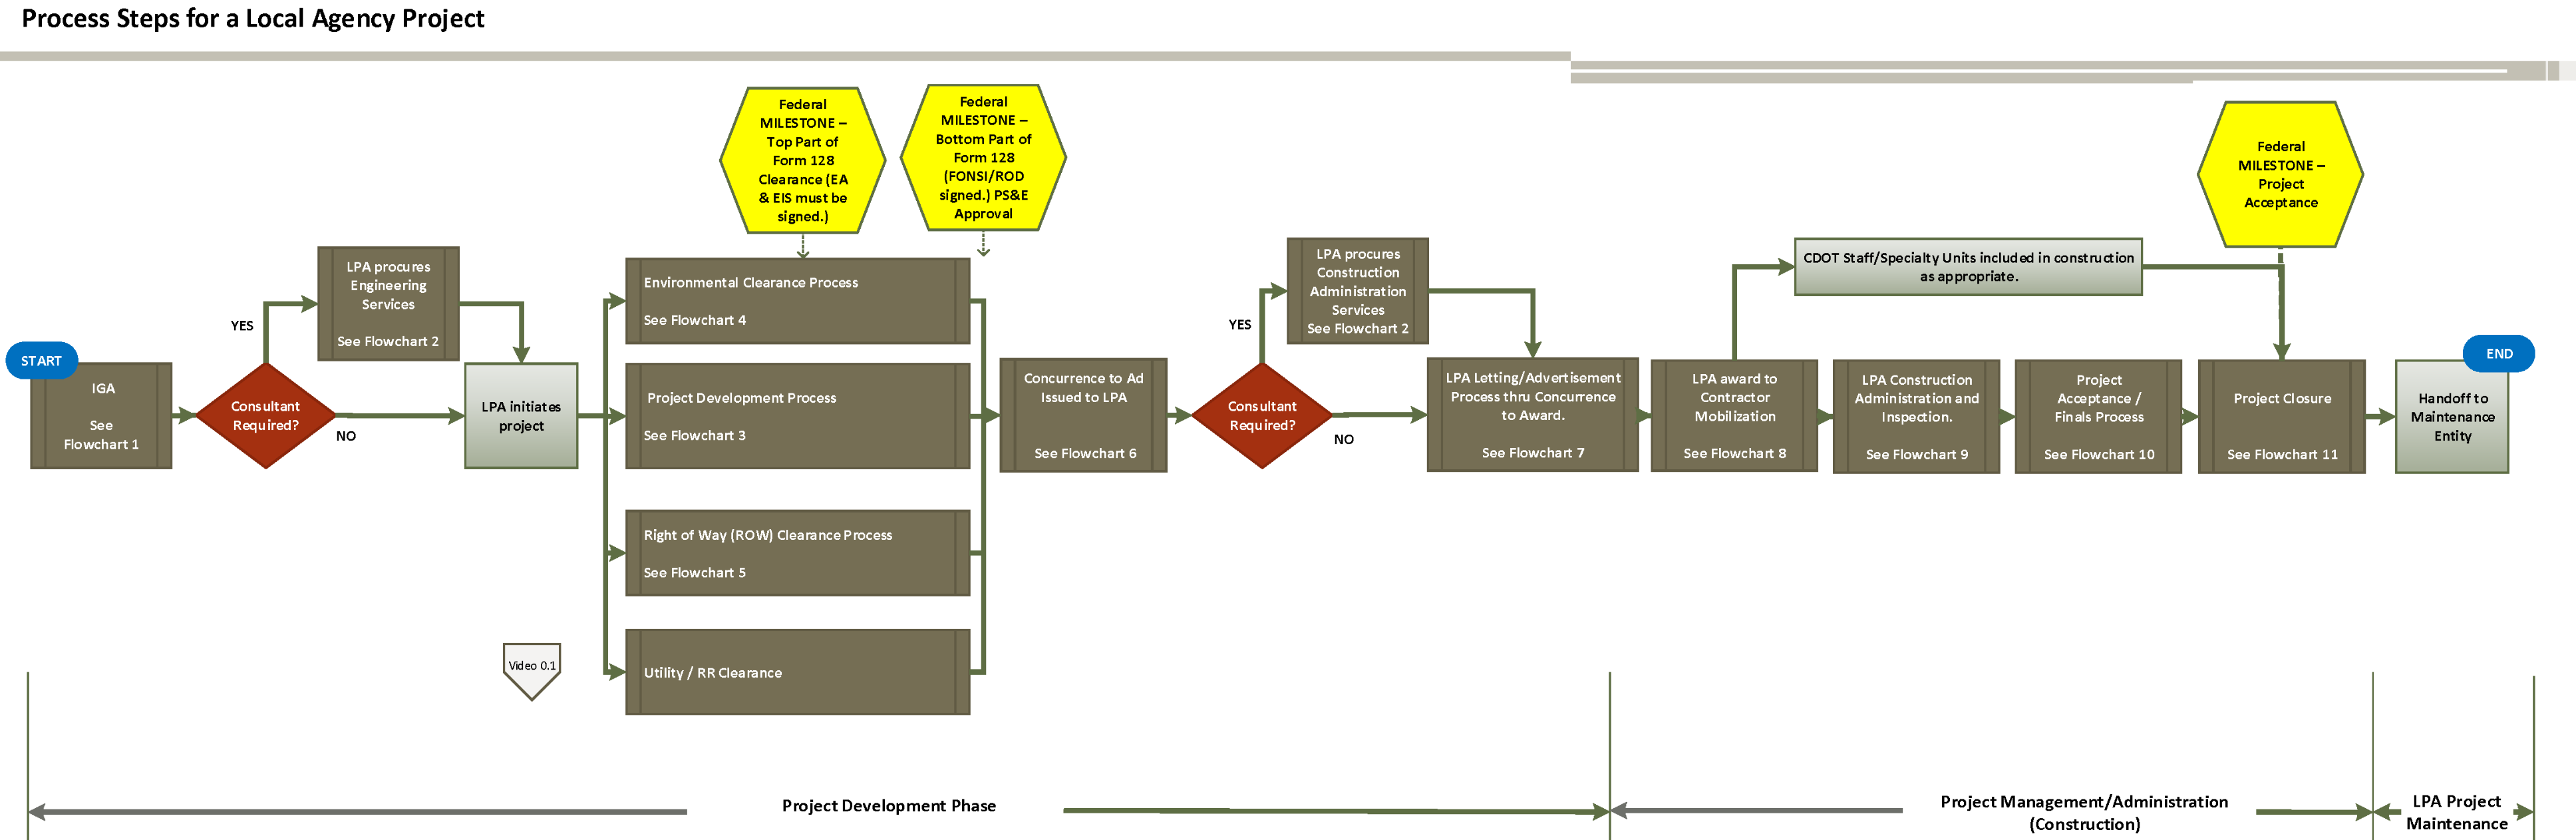 Overview Flowchart.png detail image